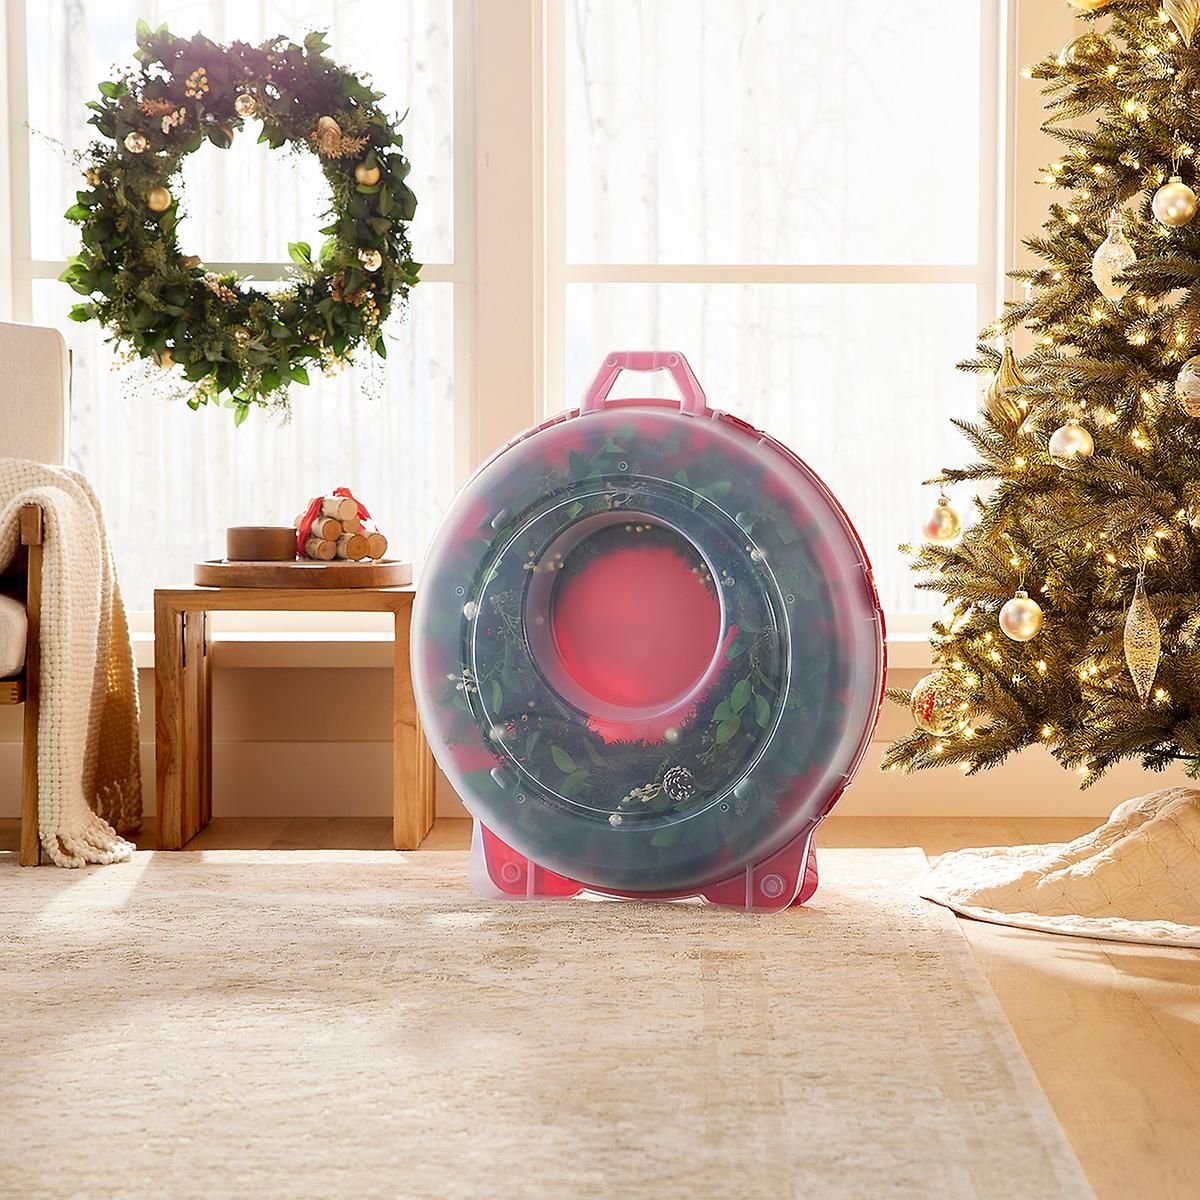 30" Wreath Storage Box | The Container Store